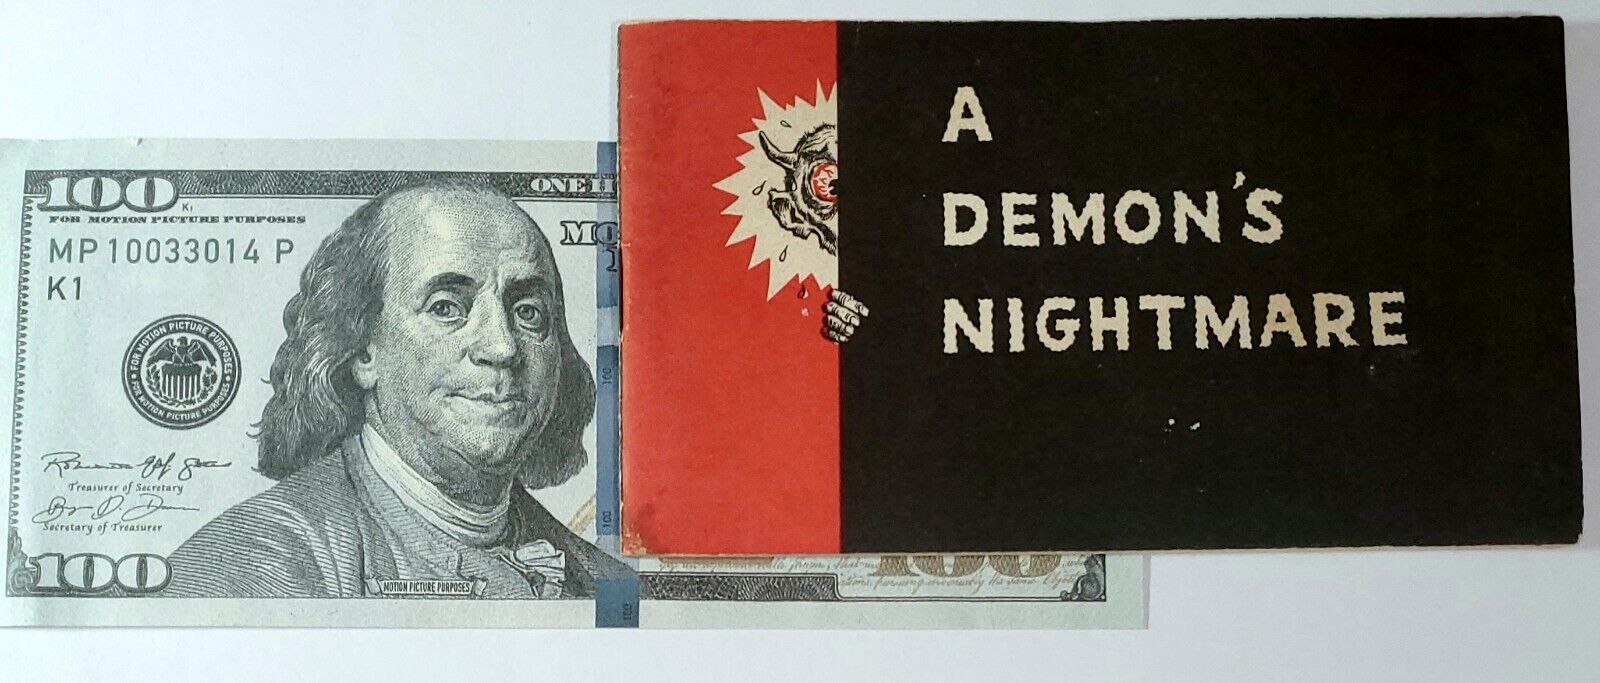 Jack Chick tract a Demon’s  Nightmare 1st print 1970 J.T.C. Chick Publications